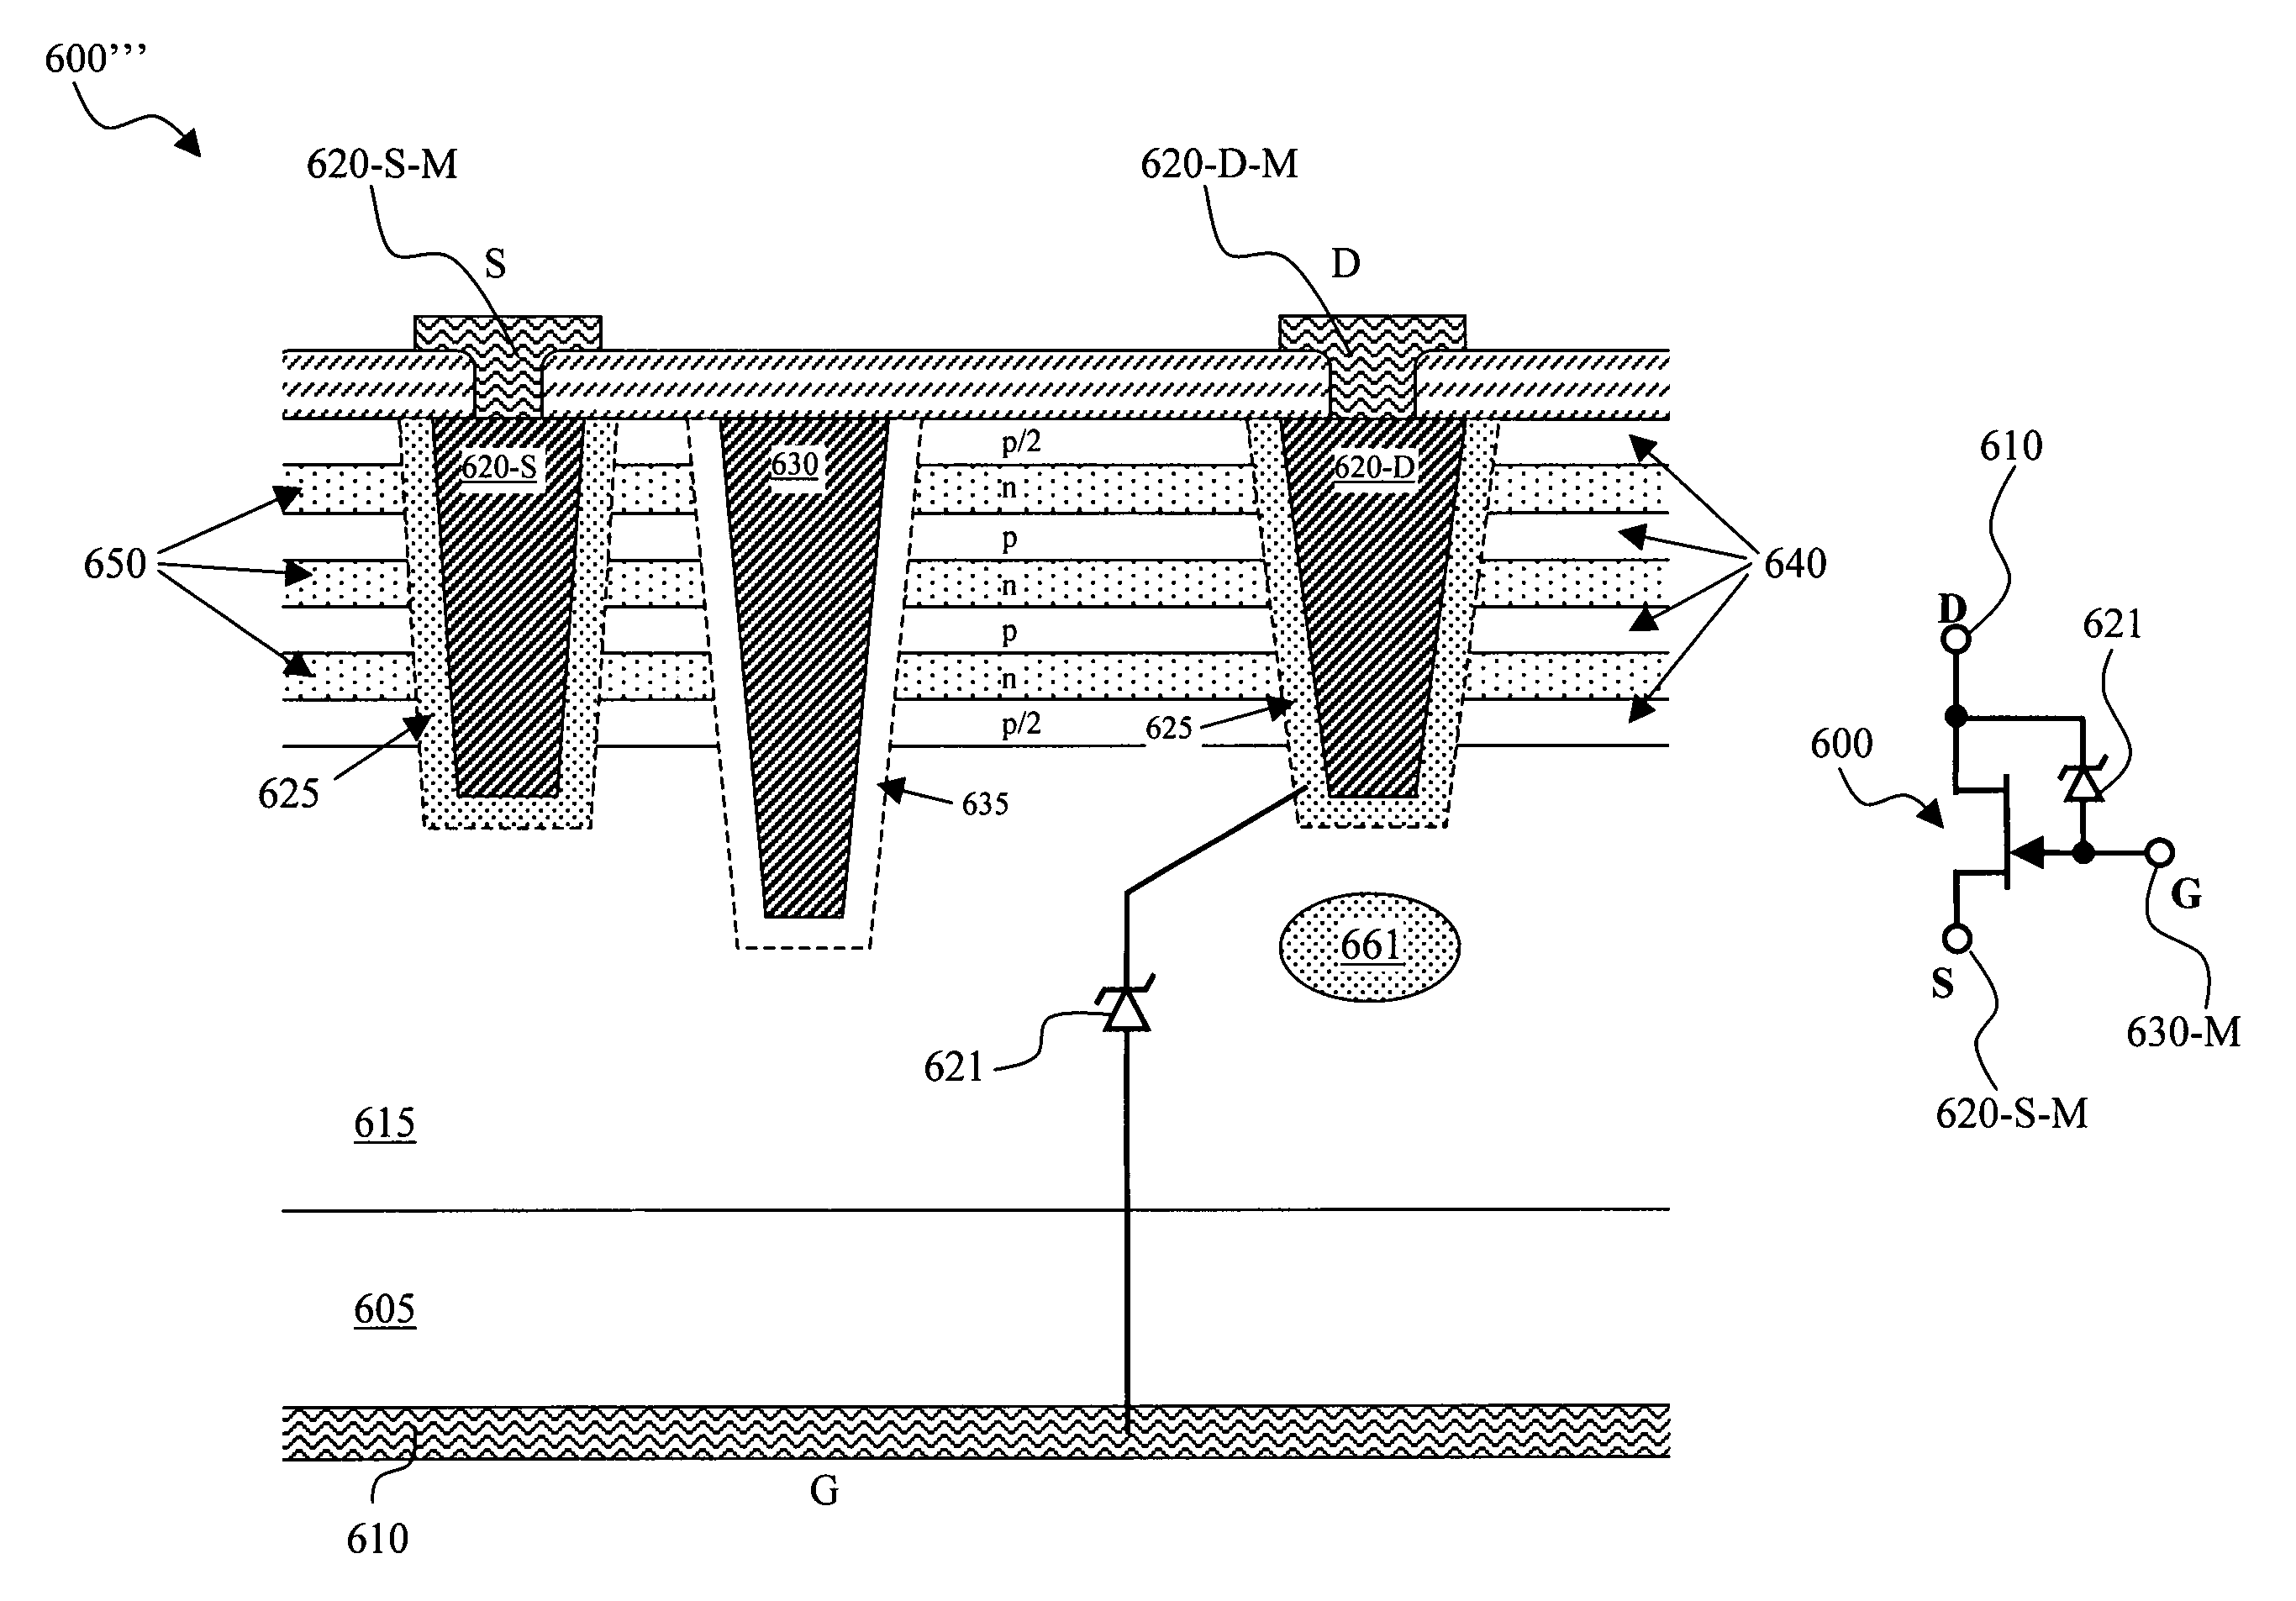 Lateral super junction device with high substrate-drain breakdown and built-in avalanche clamp diode